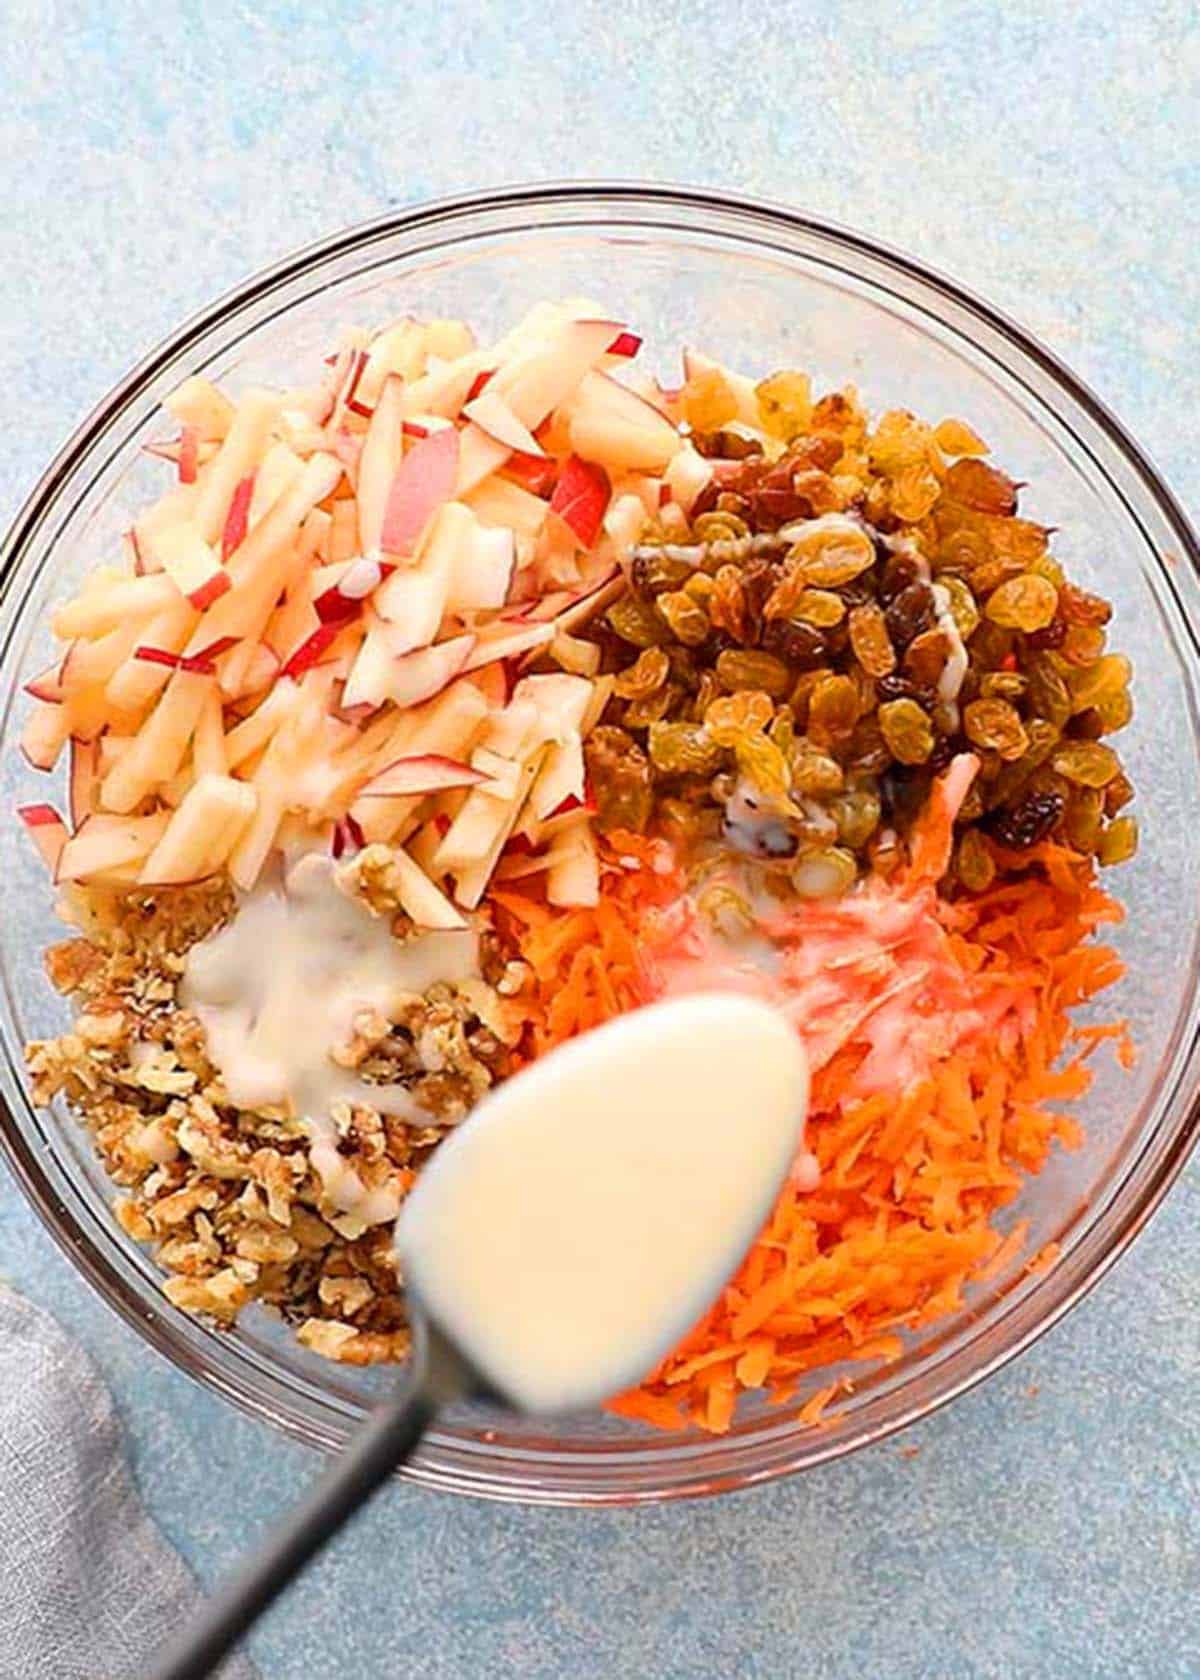 all carrot salad ingredients assembled in a glass bowl.